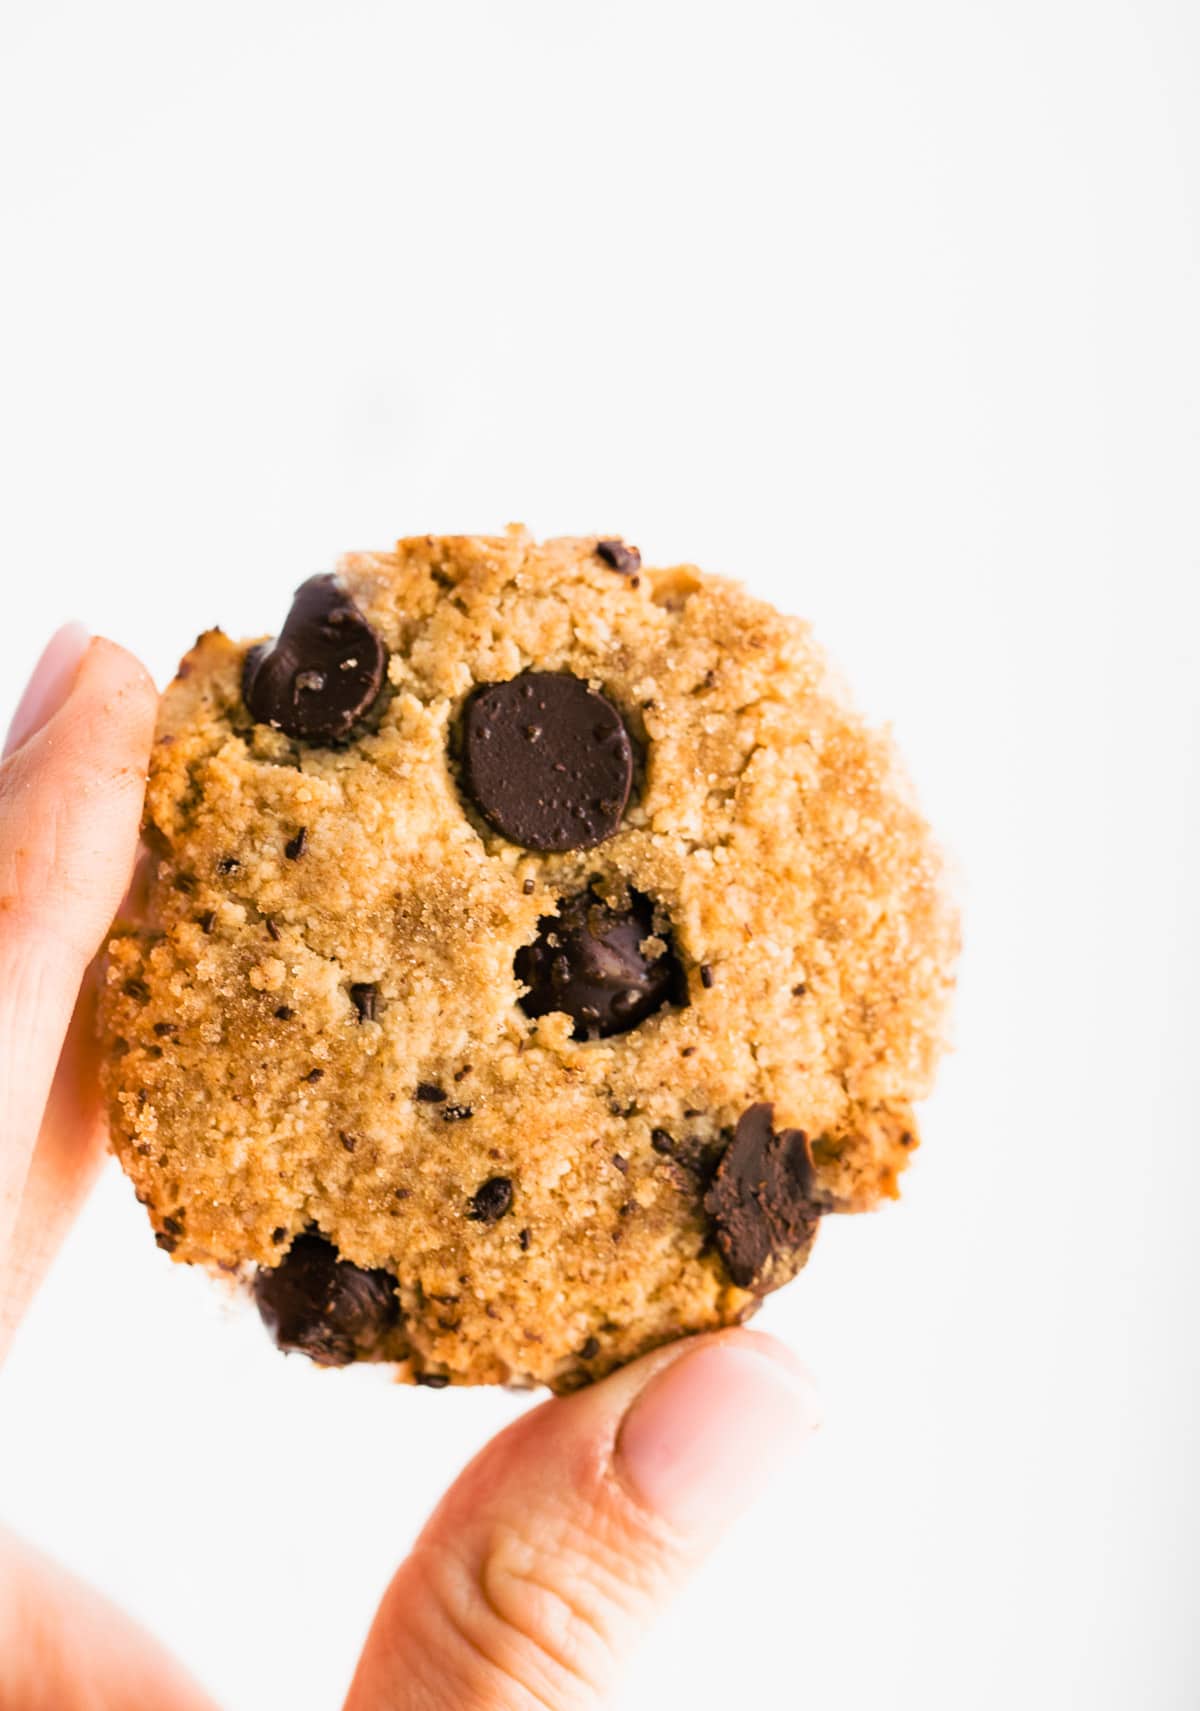 An almond flour chocolate chip cookie being held between two fingers.